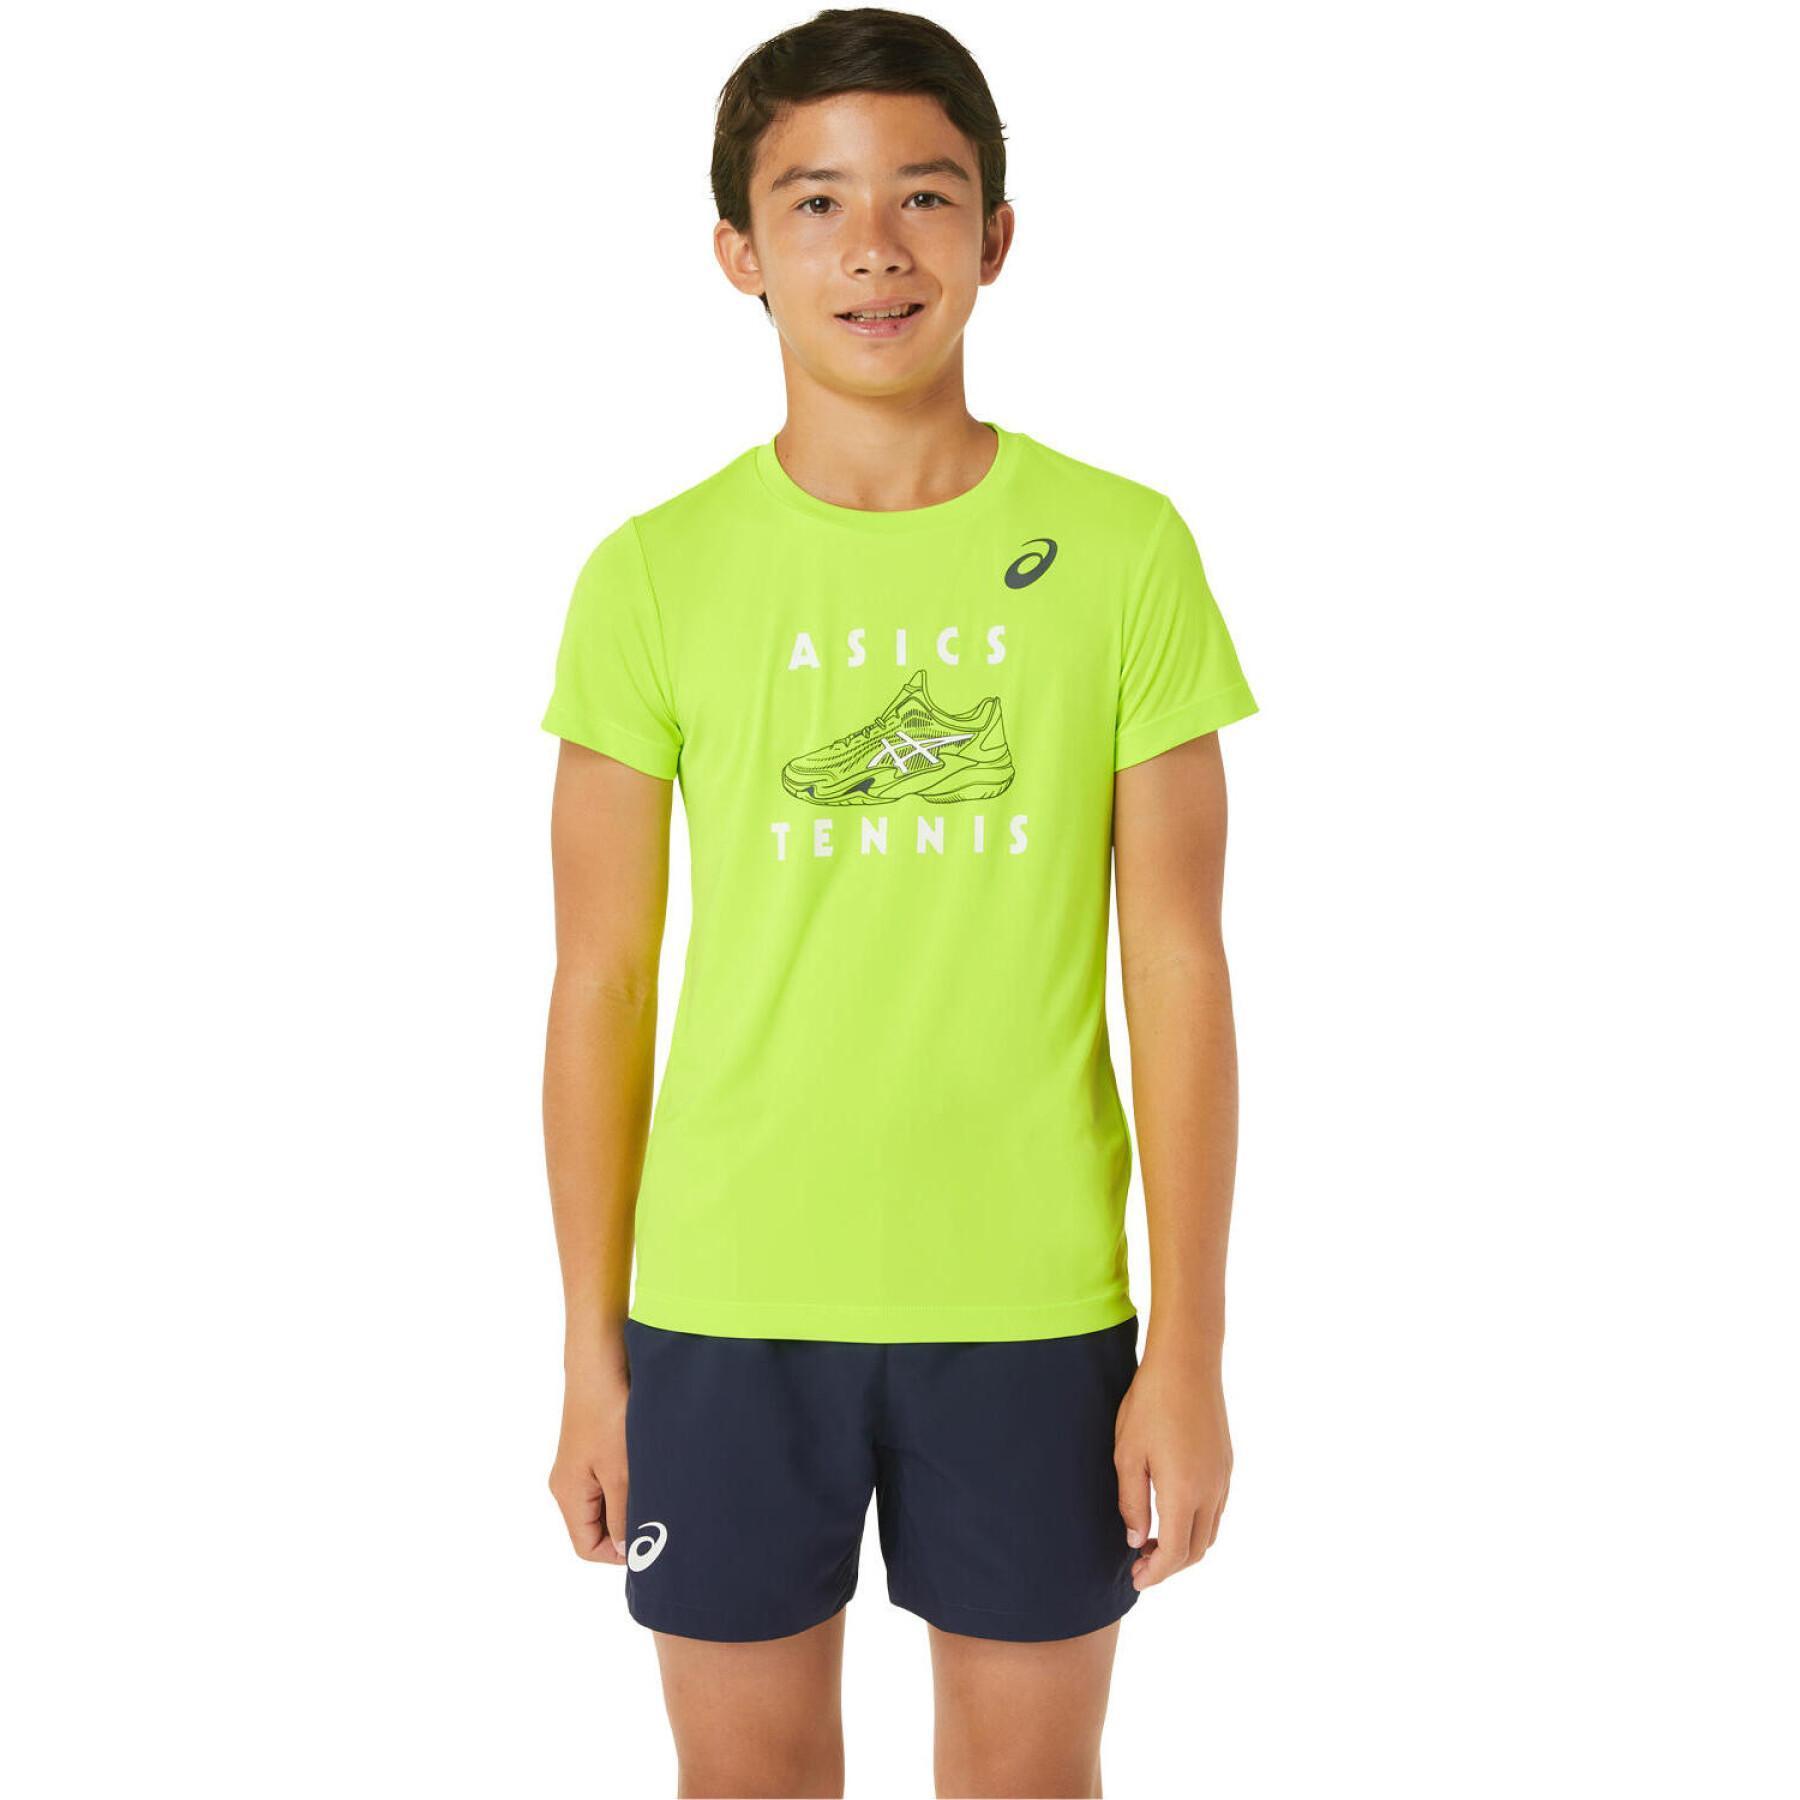 Tennis jersey for kids Asics graphic